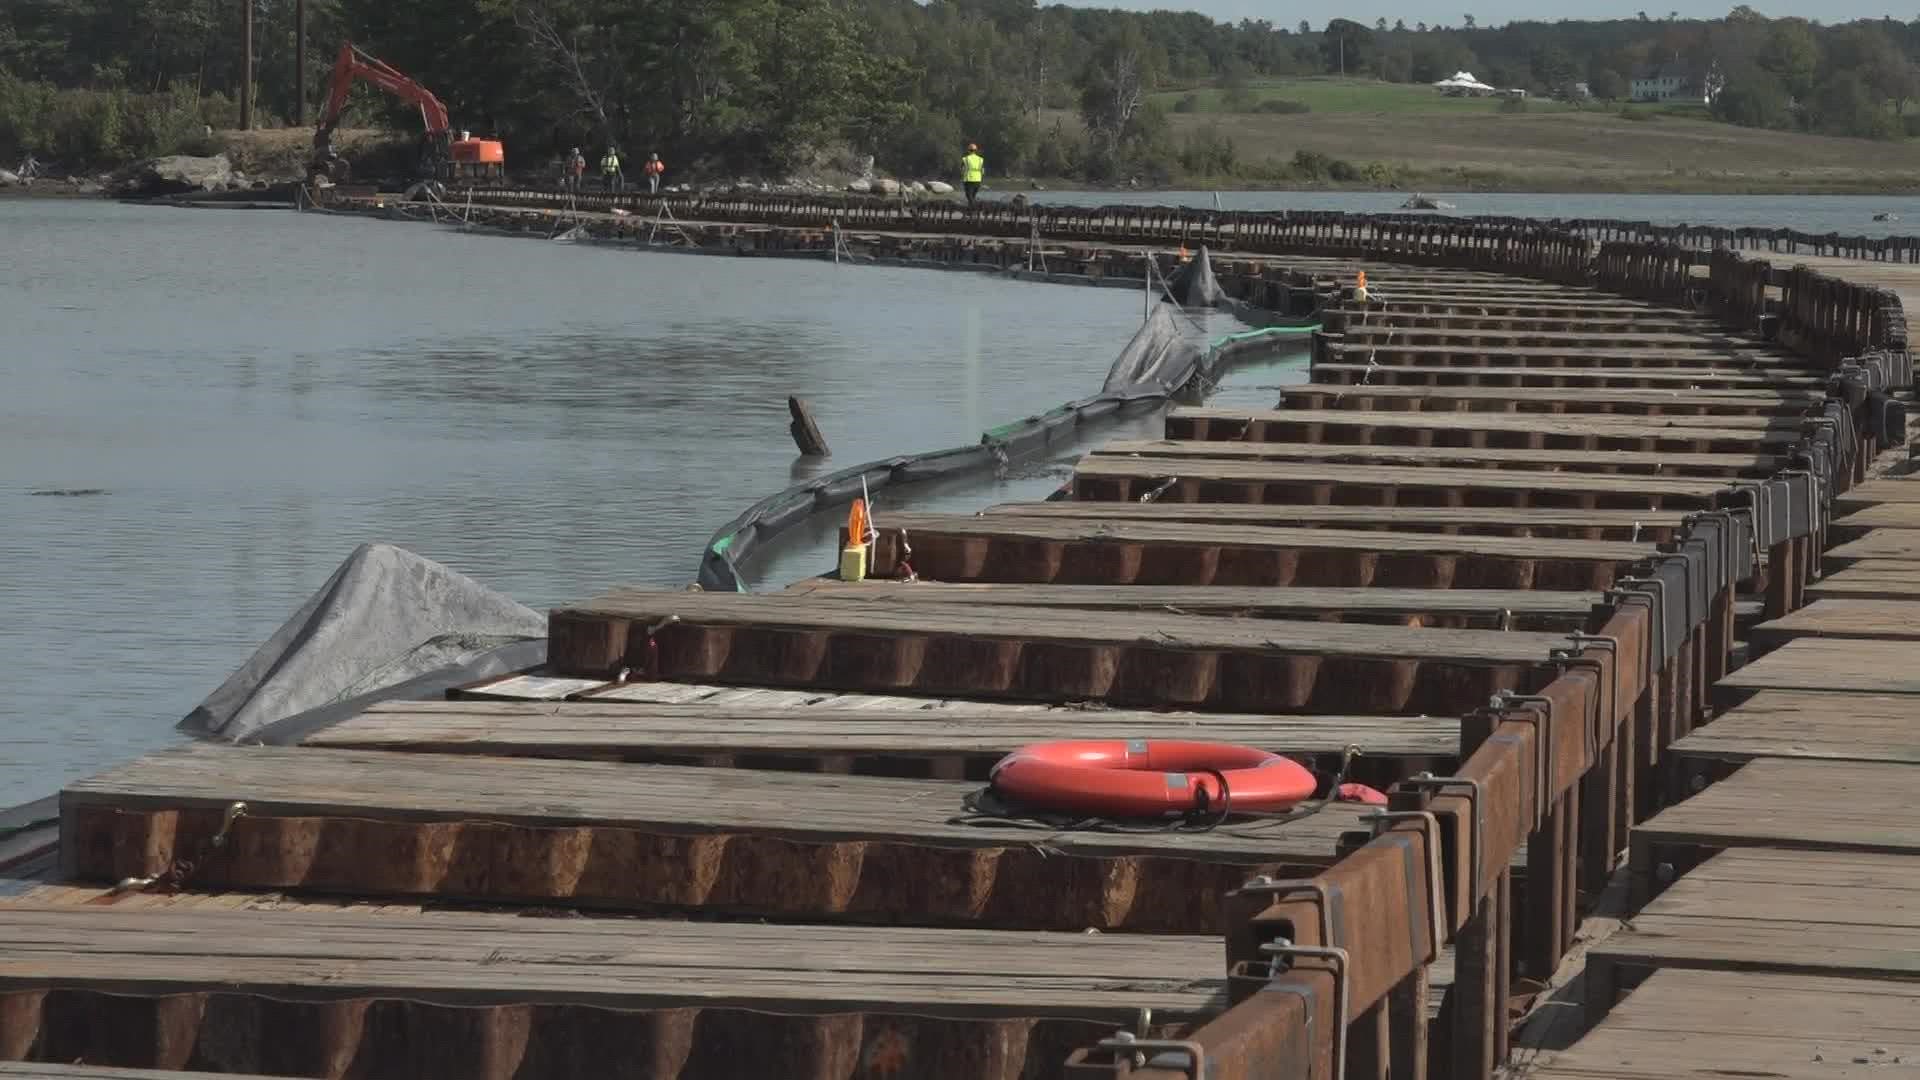 The 'floating road' in Great Salt Bay off of Newcastle has allowed Central Maine Power to tend to an aging transmission line without disrupting the environment.